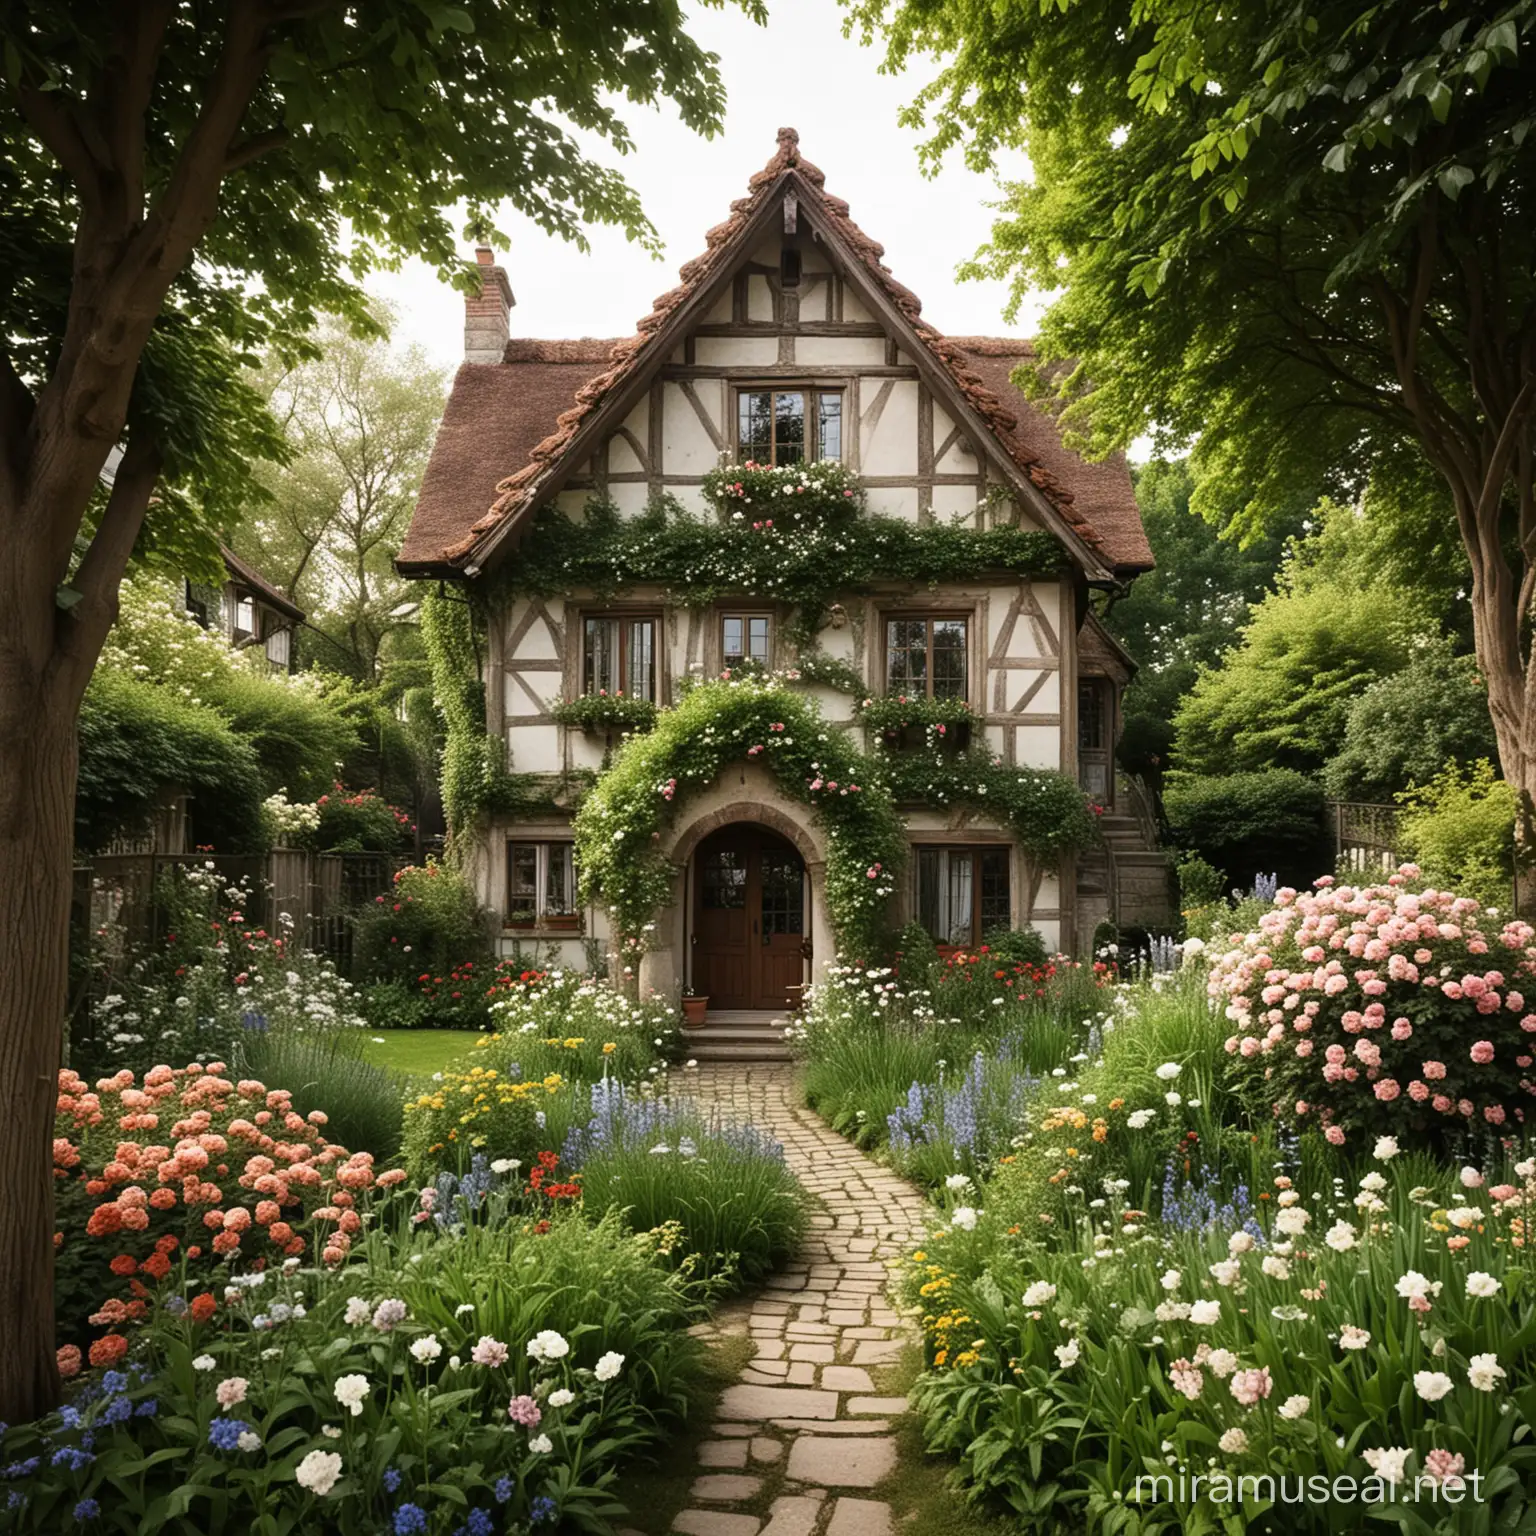 My dream house



My dream house would be located near the city where I’m surrounded by the people I cherish. My house would be a detached home, surrounded by a garden with trees and flowers. It will be a place where It is cozy, homely and I find my true peace.